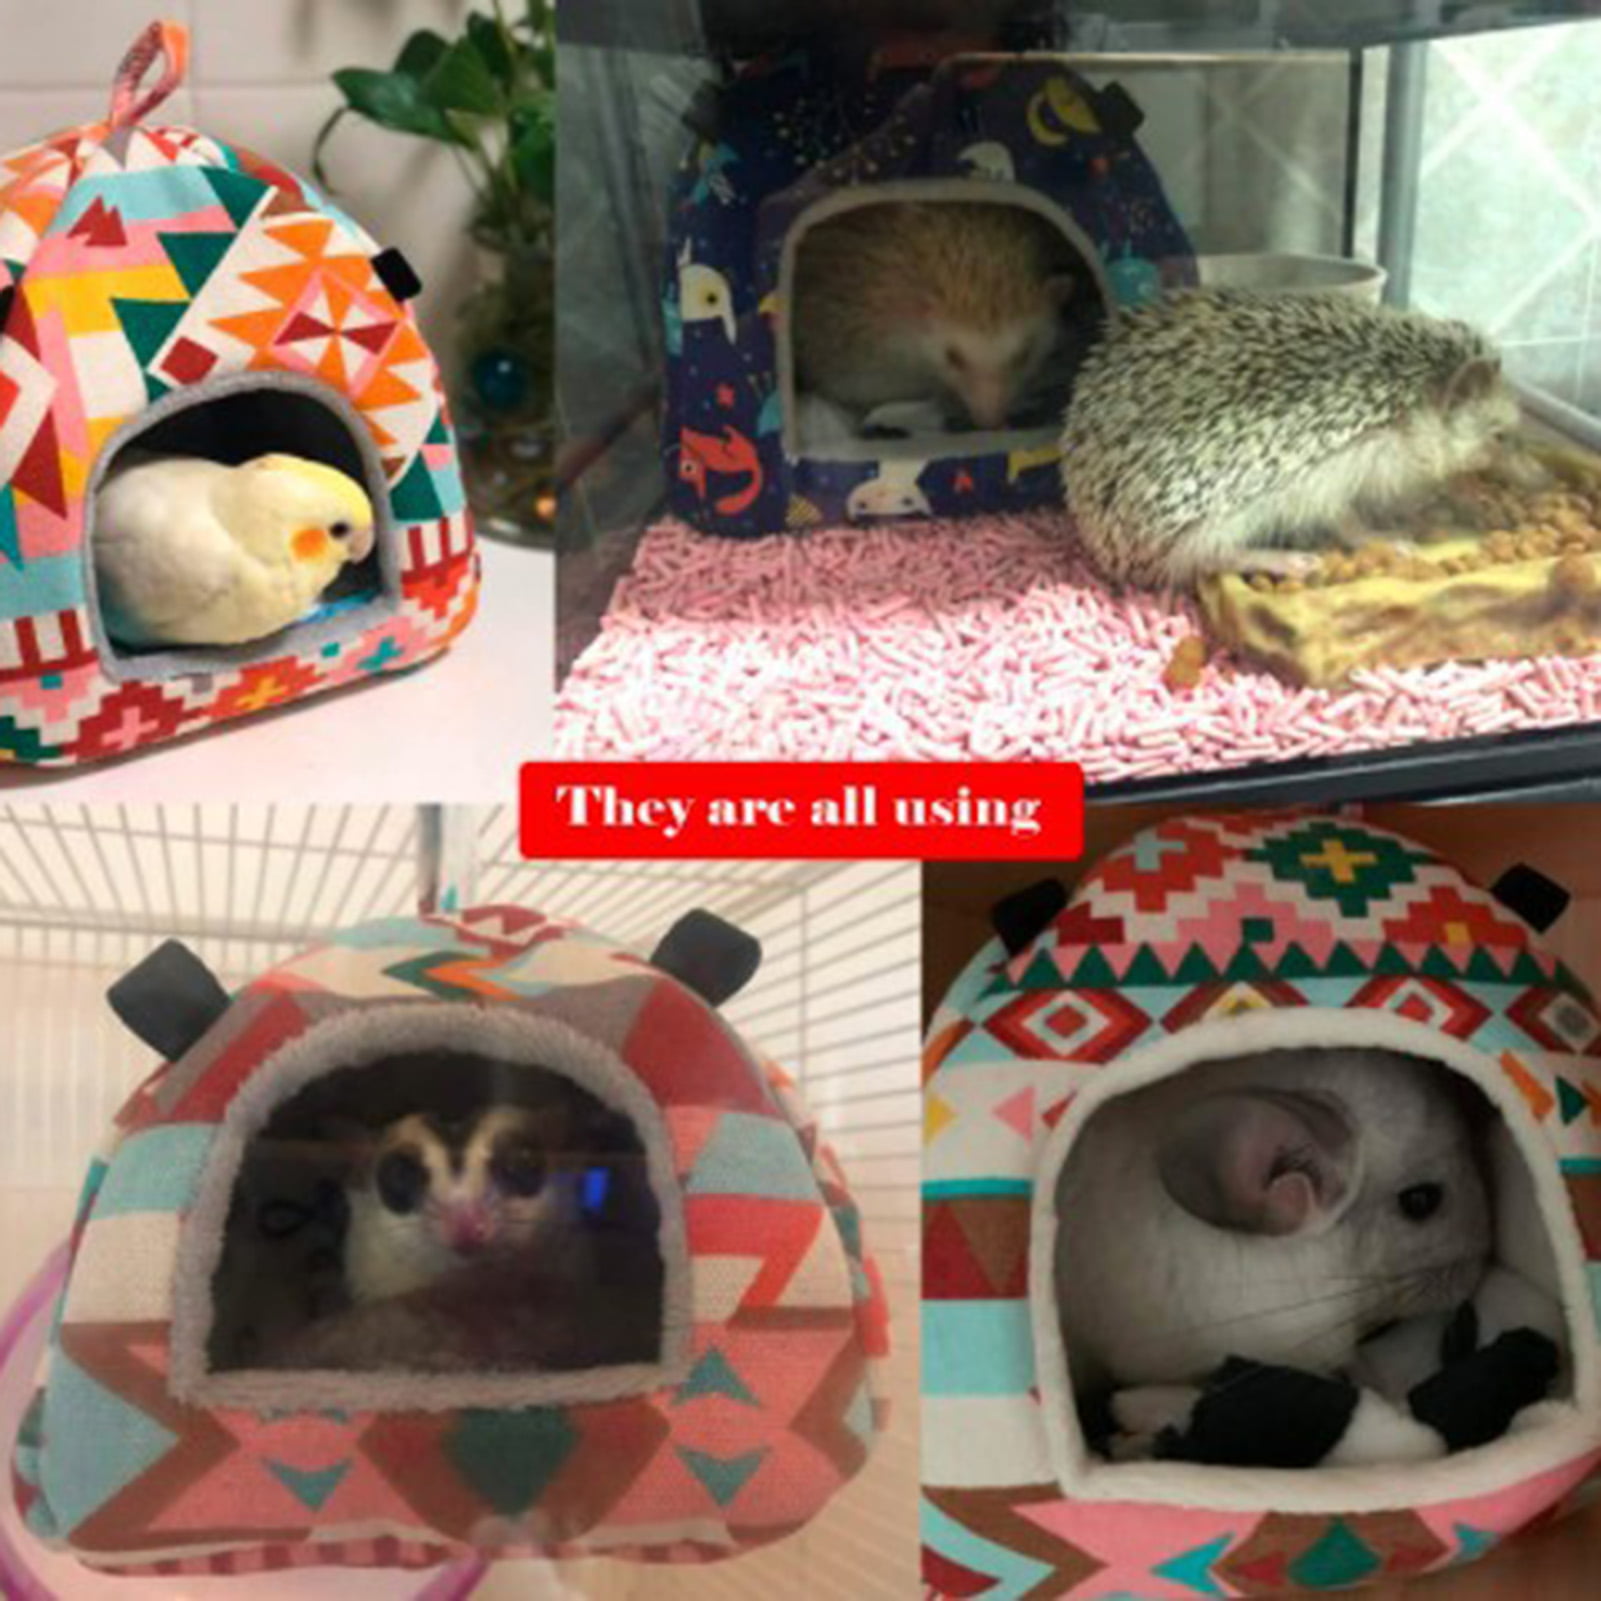 CAISHOW Guinea Pig Hamster Bird Squirrel Ferret Suger Glider Hedgehog Chinchillas Bed Hammock Winter Warm Small Pet Animal Hanging Home House Cotton Cage Nest Tent 